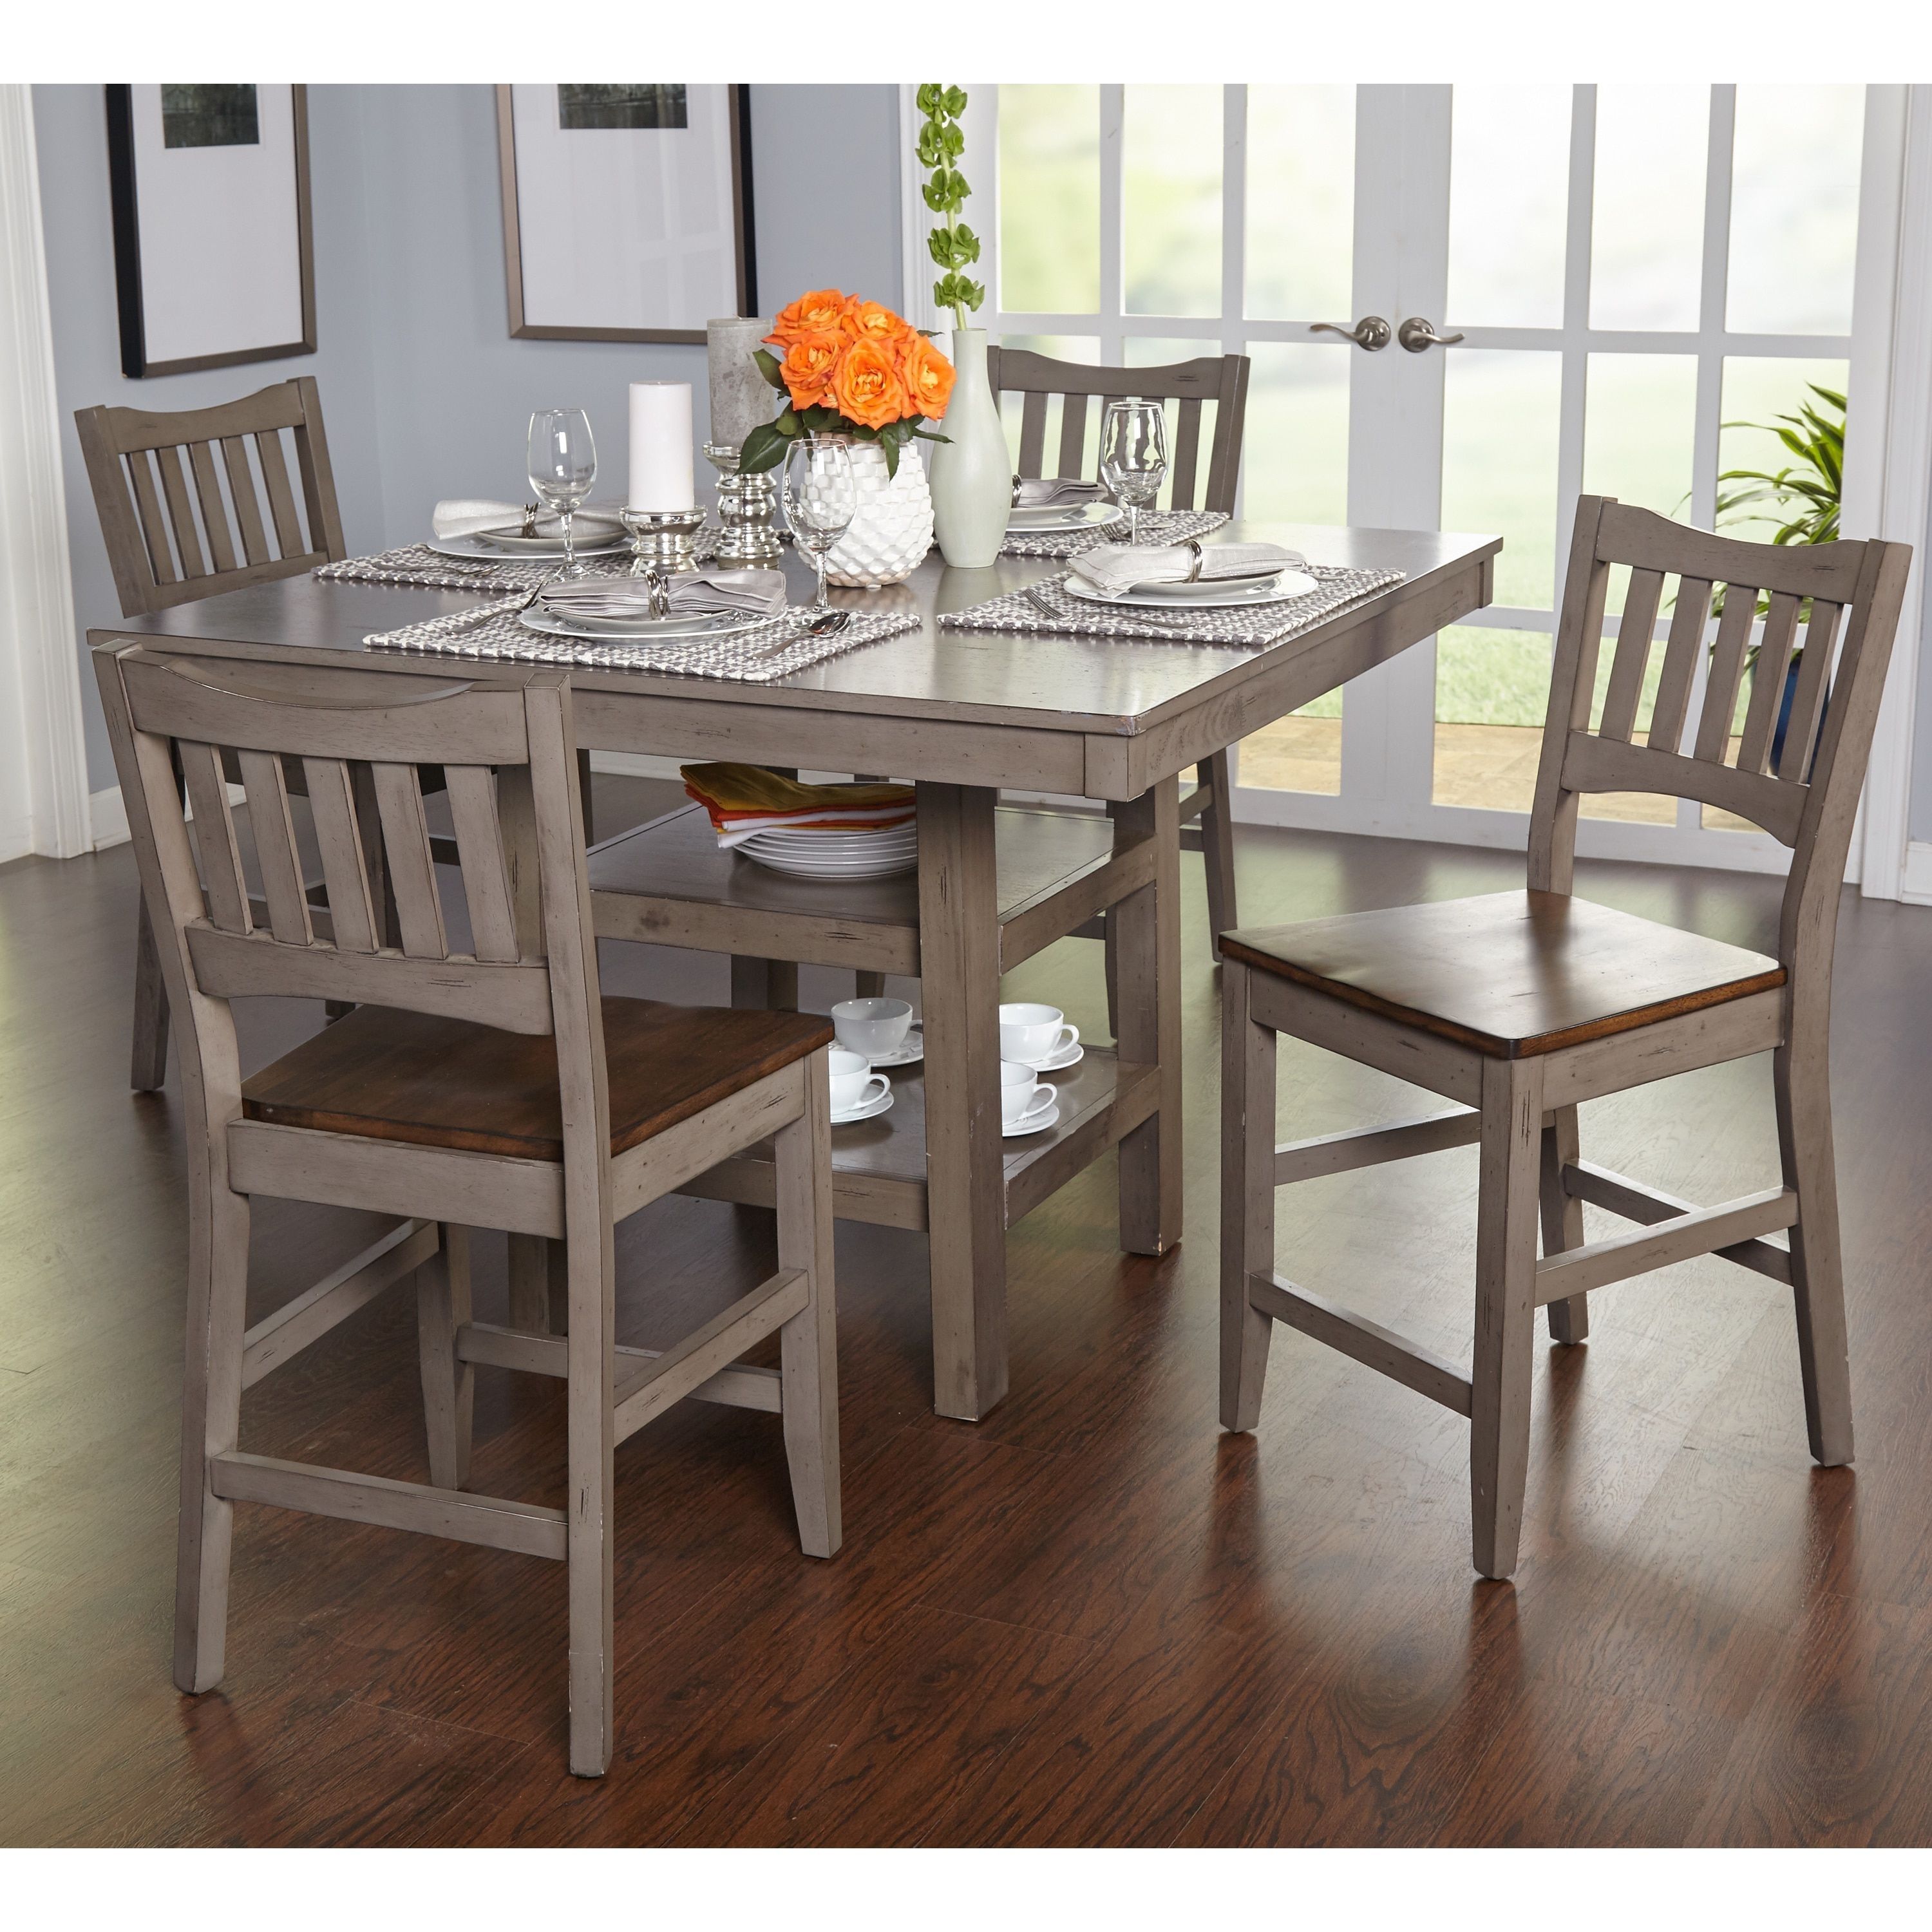 Embrace Transitional Style With This Handsome Simple Living Counter In Most Popular Candice Ii 5 Piece Round Dining Sets With Slat Back Side Chairs (View 16 of 20)